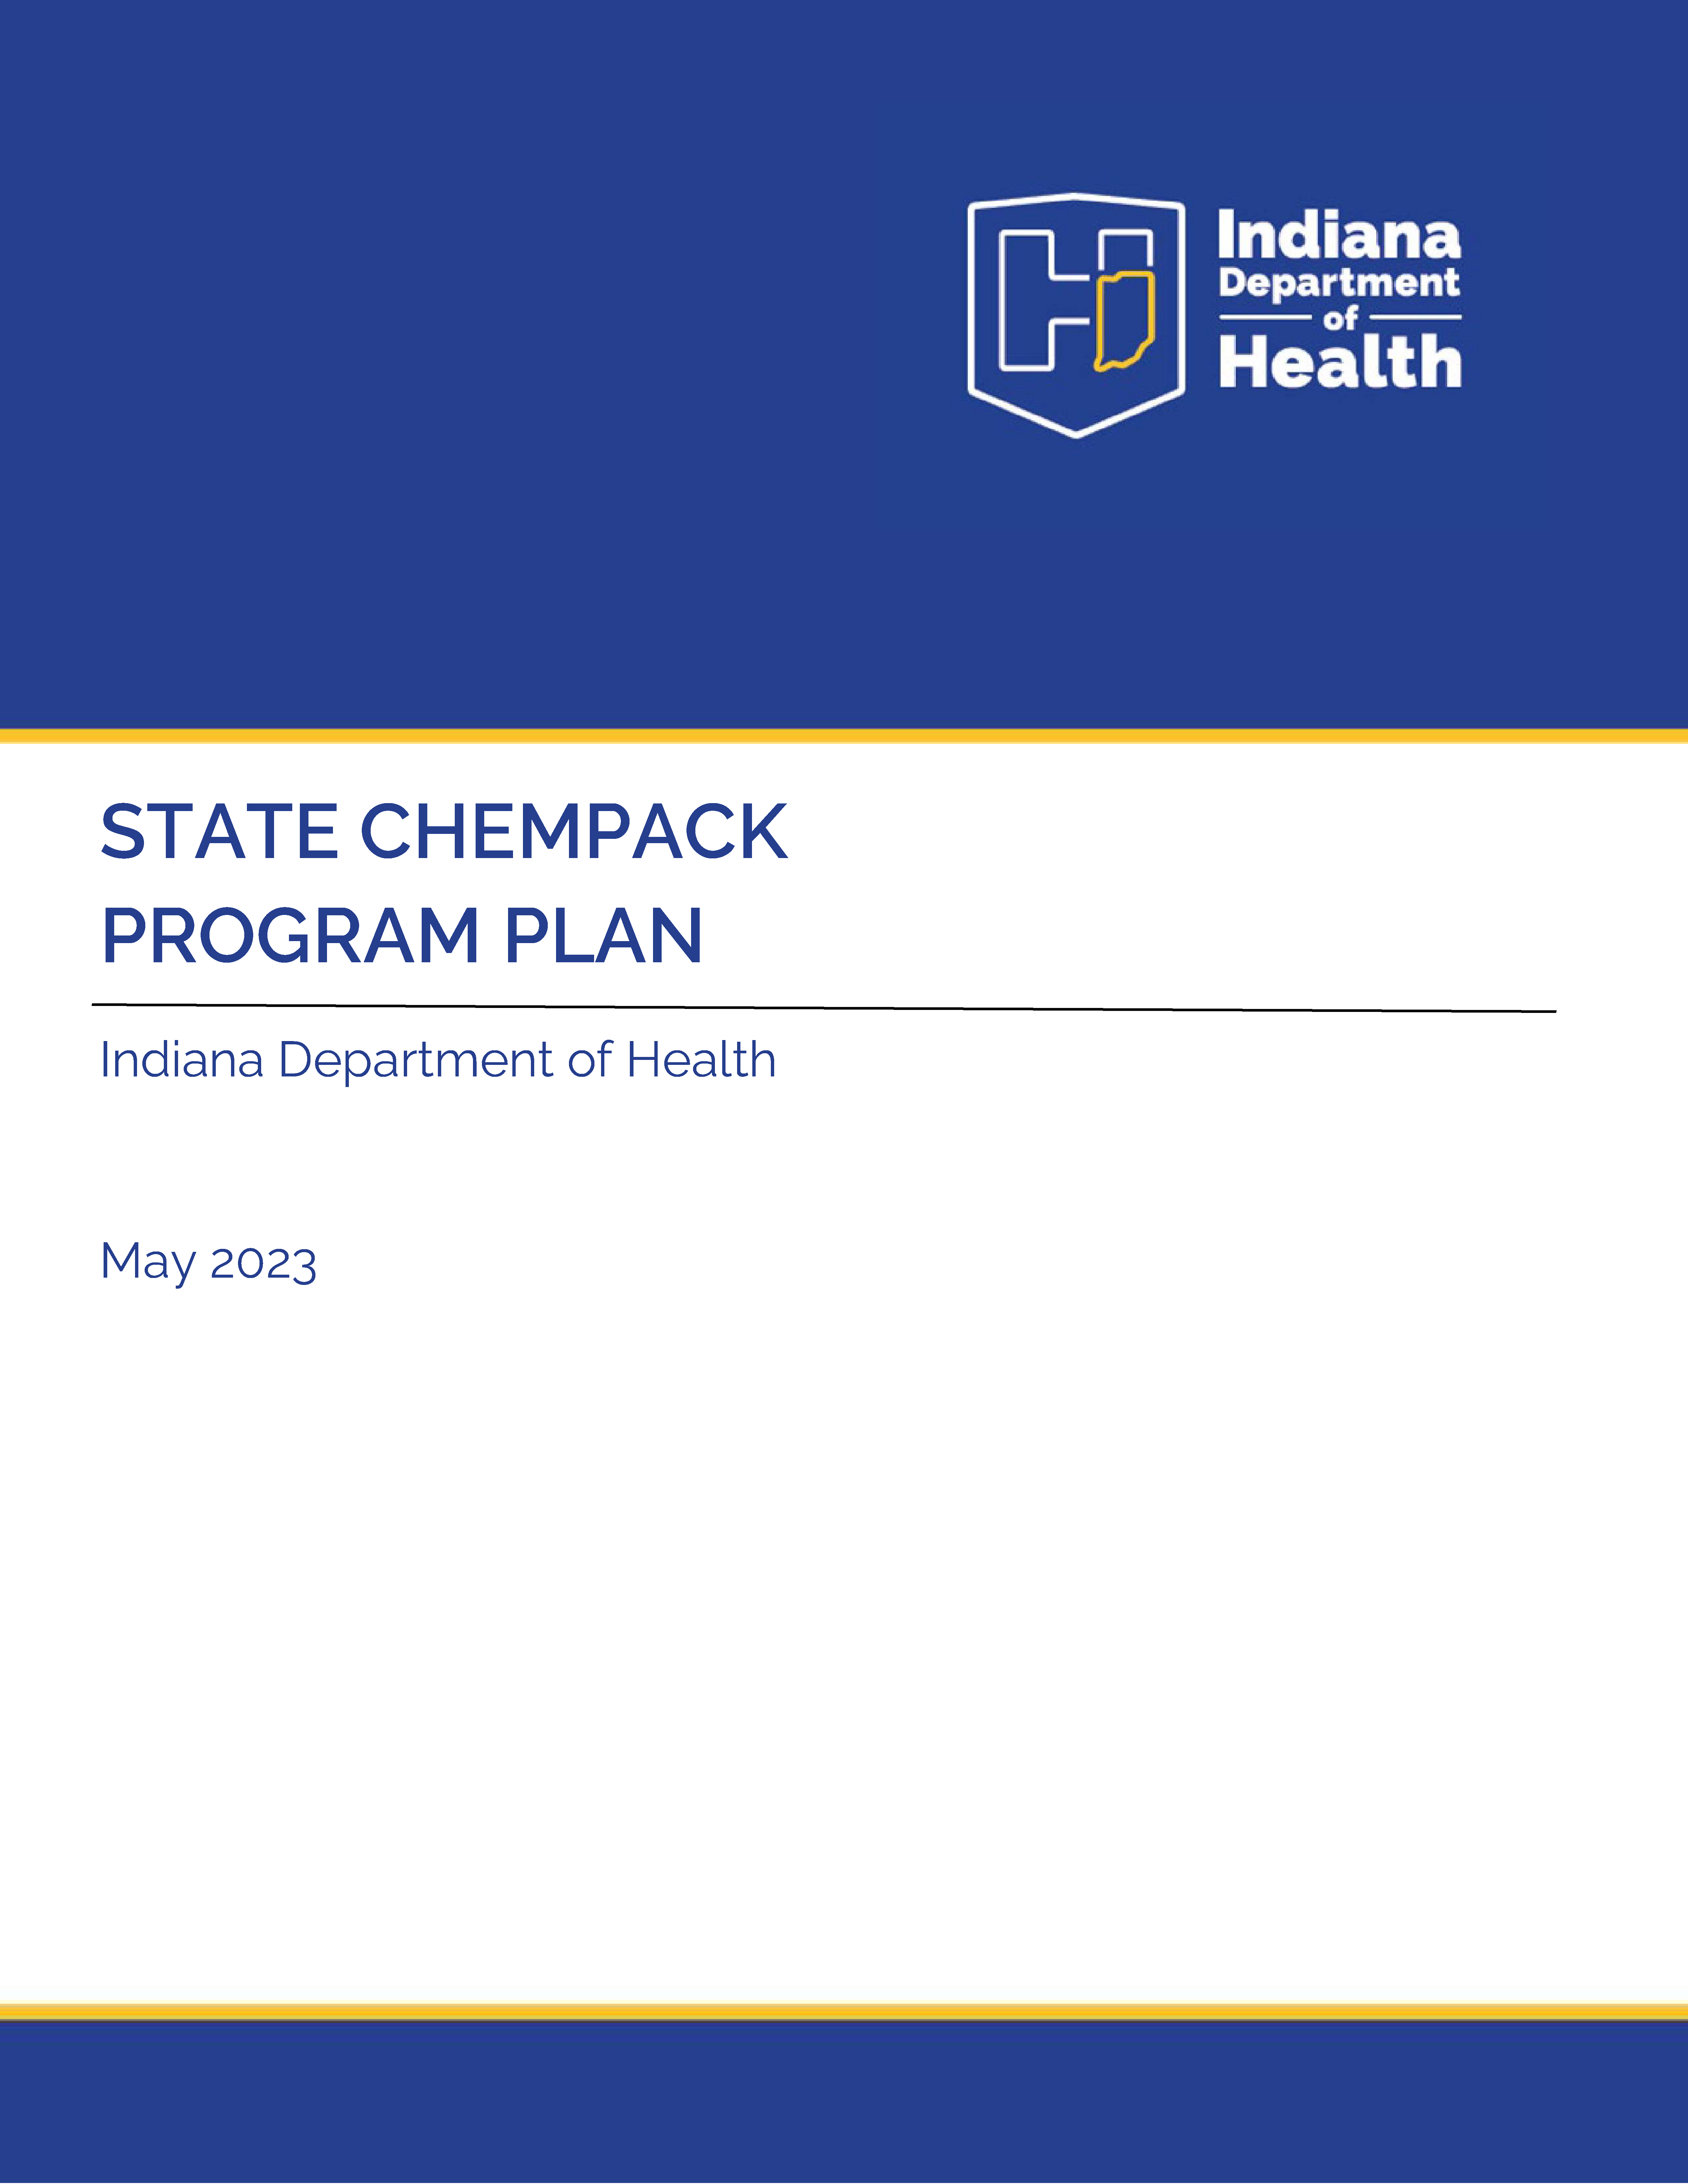 CHEMPACK Plan Front Page